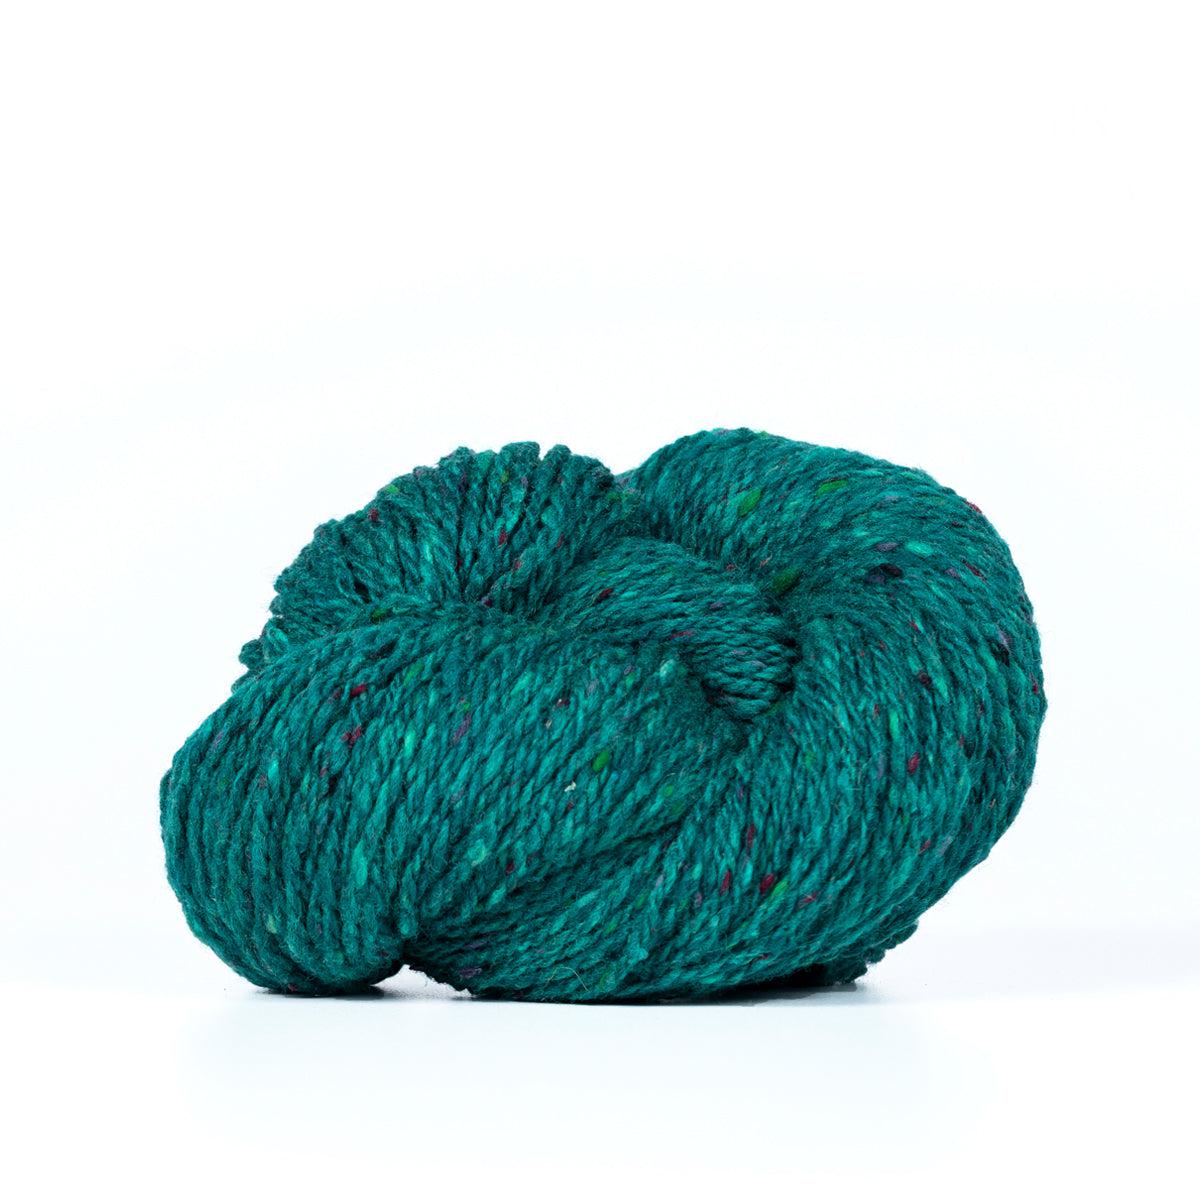 A skein of Kelbourne Woolens Lucky Tweed Veridian, a bright  teal with lighter and darker blue and green flecks.